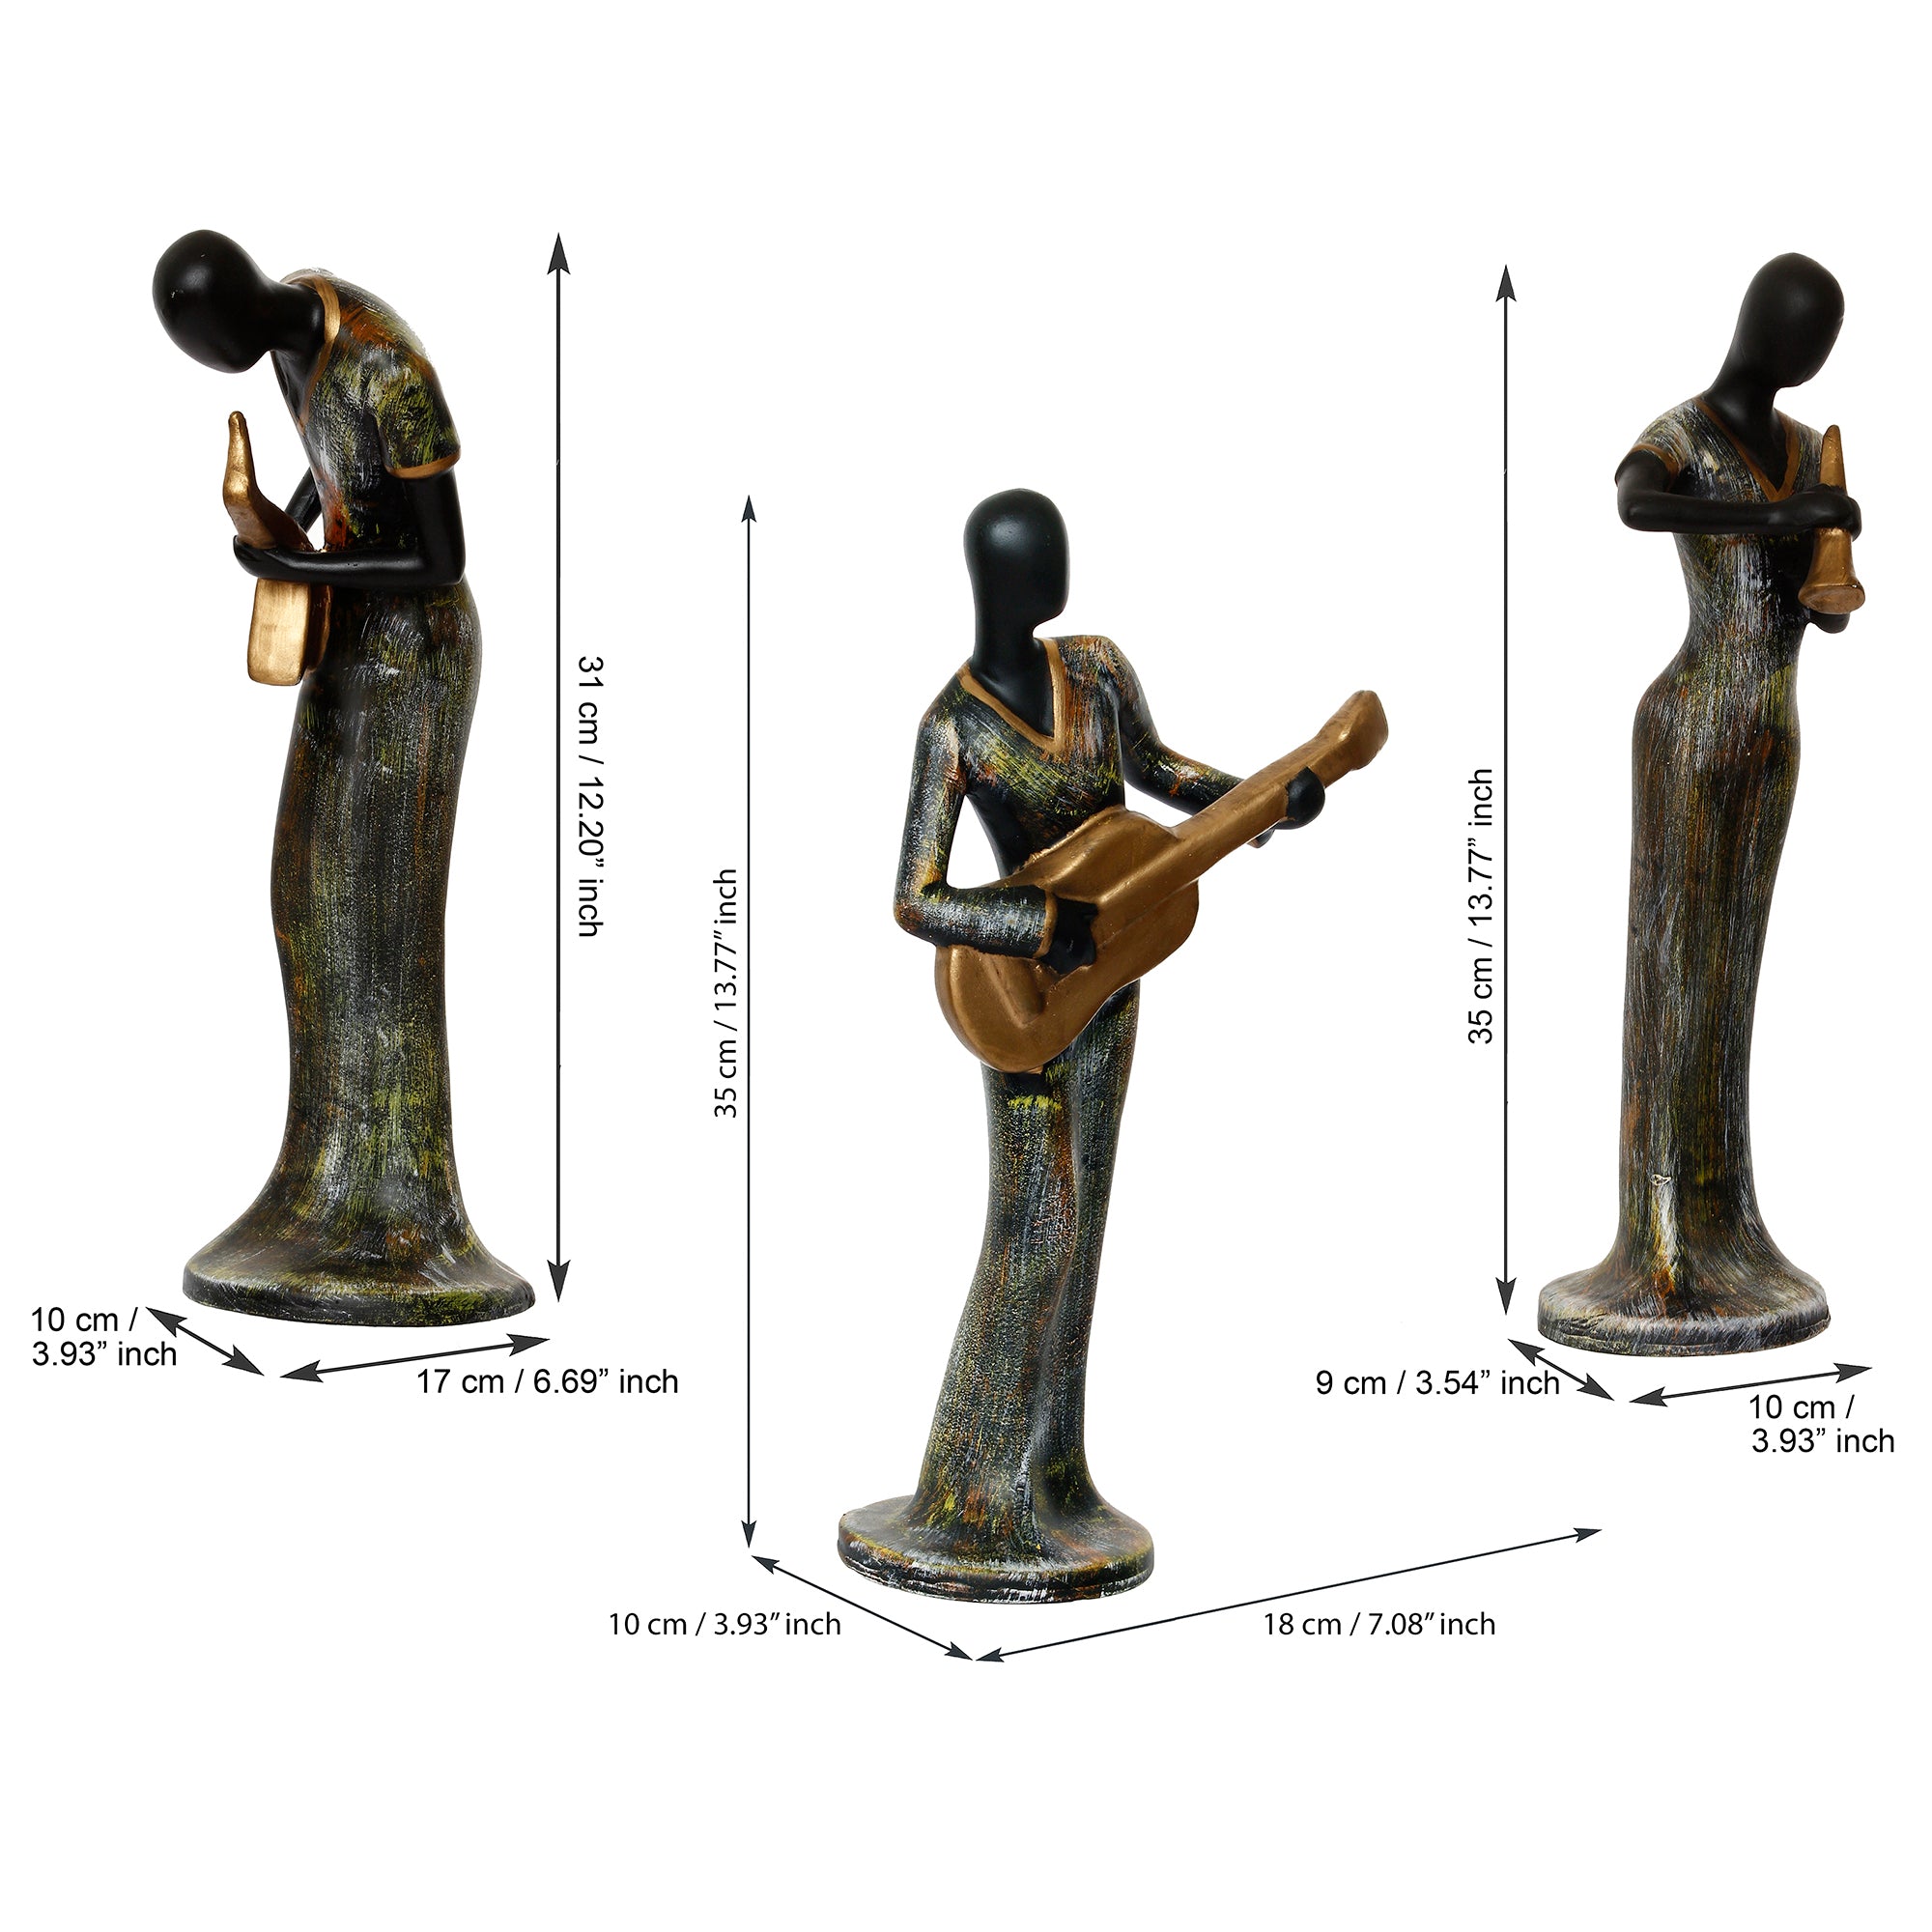 Grey and Black Polyresin Set of 3 Ladies figurines Playing Guitar, Clarinet, Saxophone Musical Instrument Handcrafted Decorative Showpiece 3